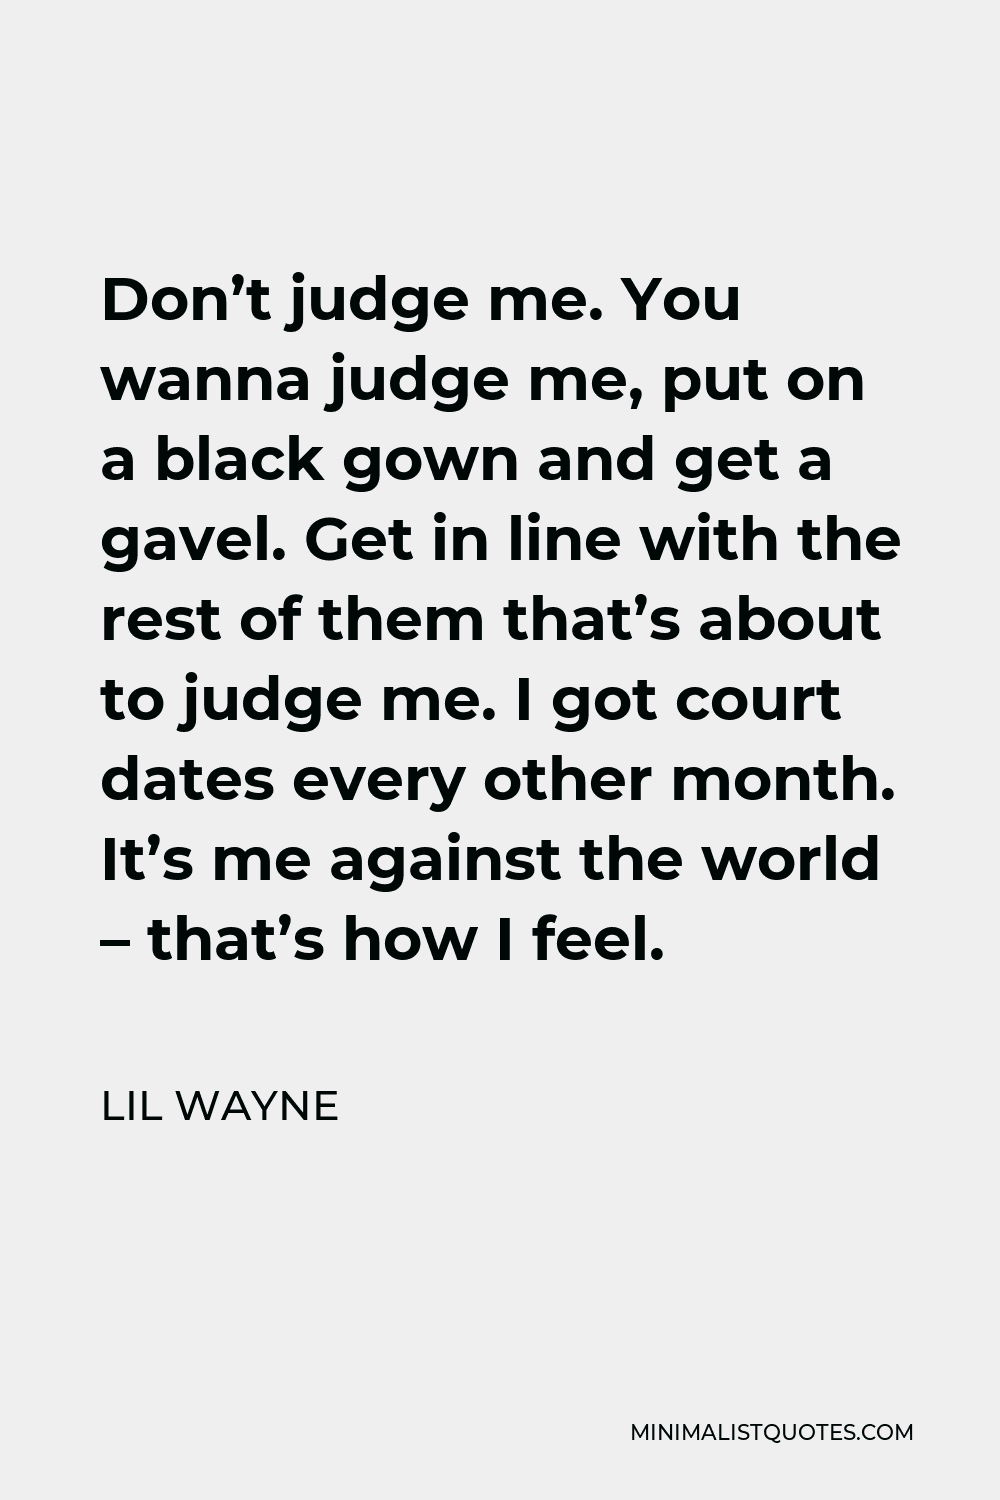 Lil Wayne Quote - Don’t judge me. You wanna judge me, put on a black gown and get a gavel. Get in line with the rest of them that’s about to judge me. I got court dates every other month. It’s me against the world – that’s how I feel.